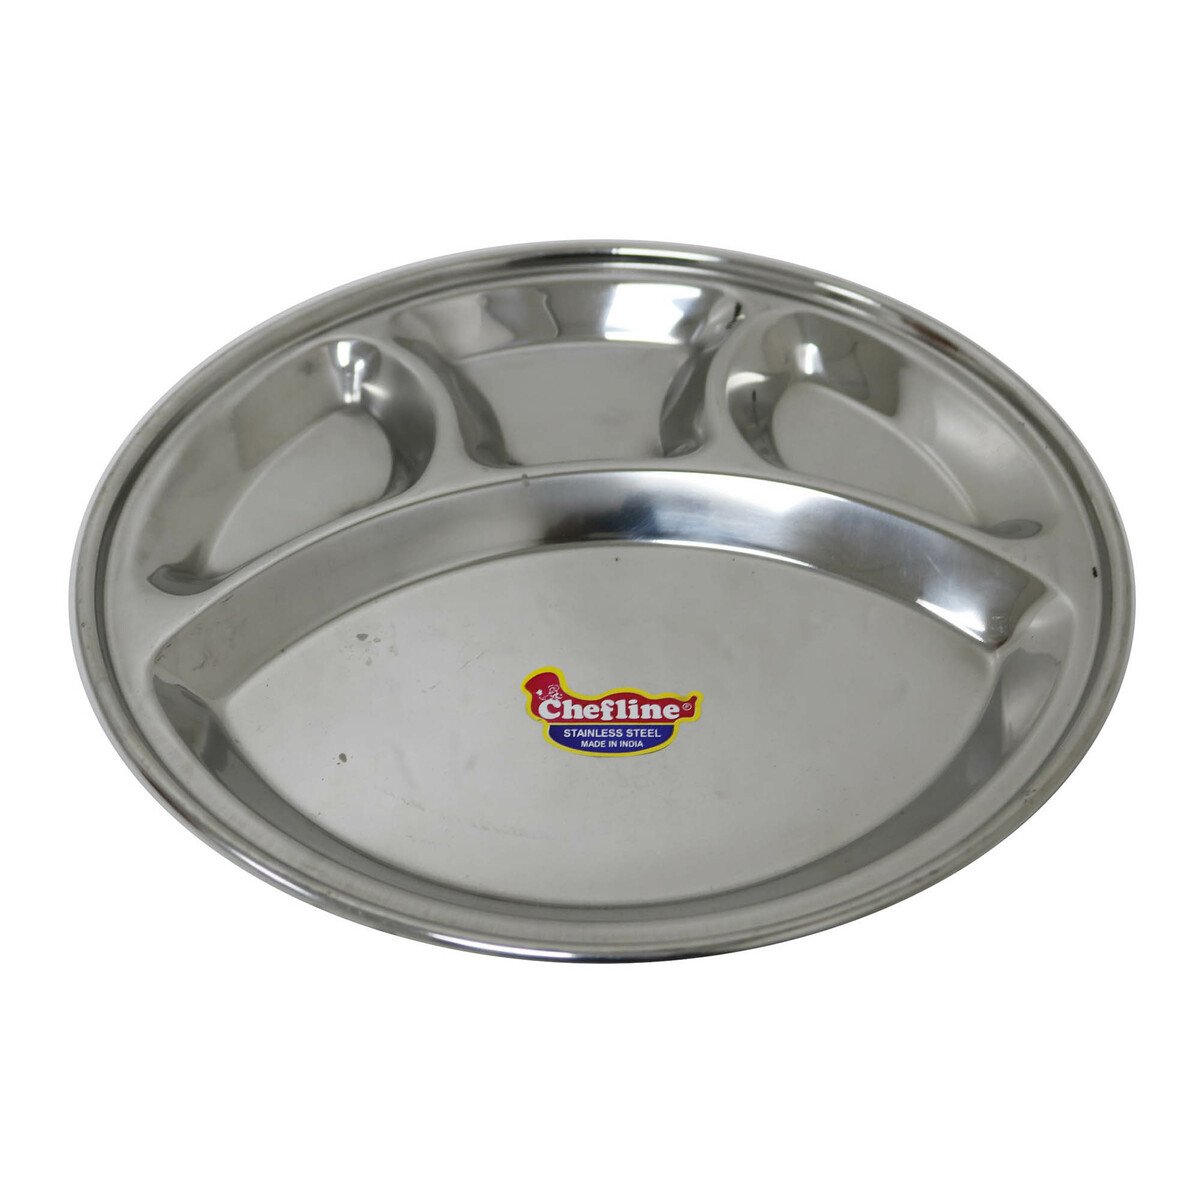 Chefline Stainless Steel Mess Thali No.13 Ind